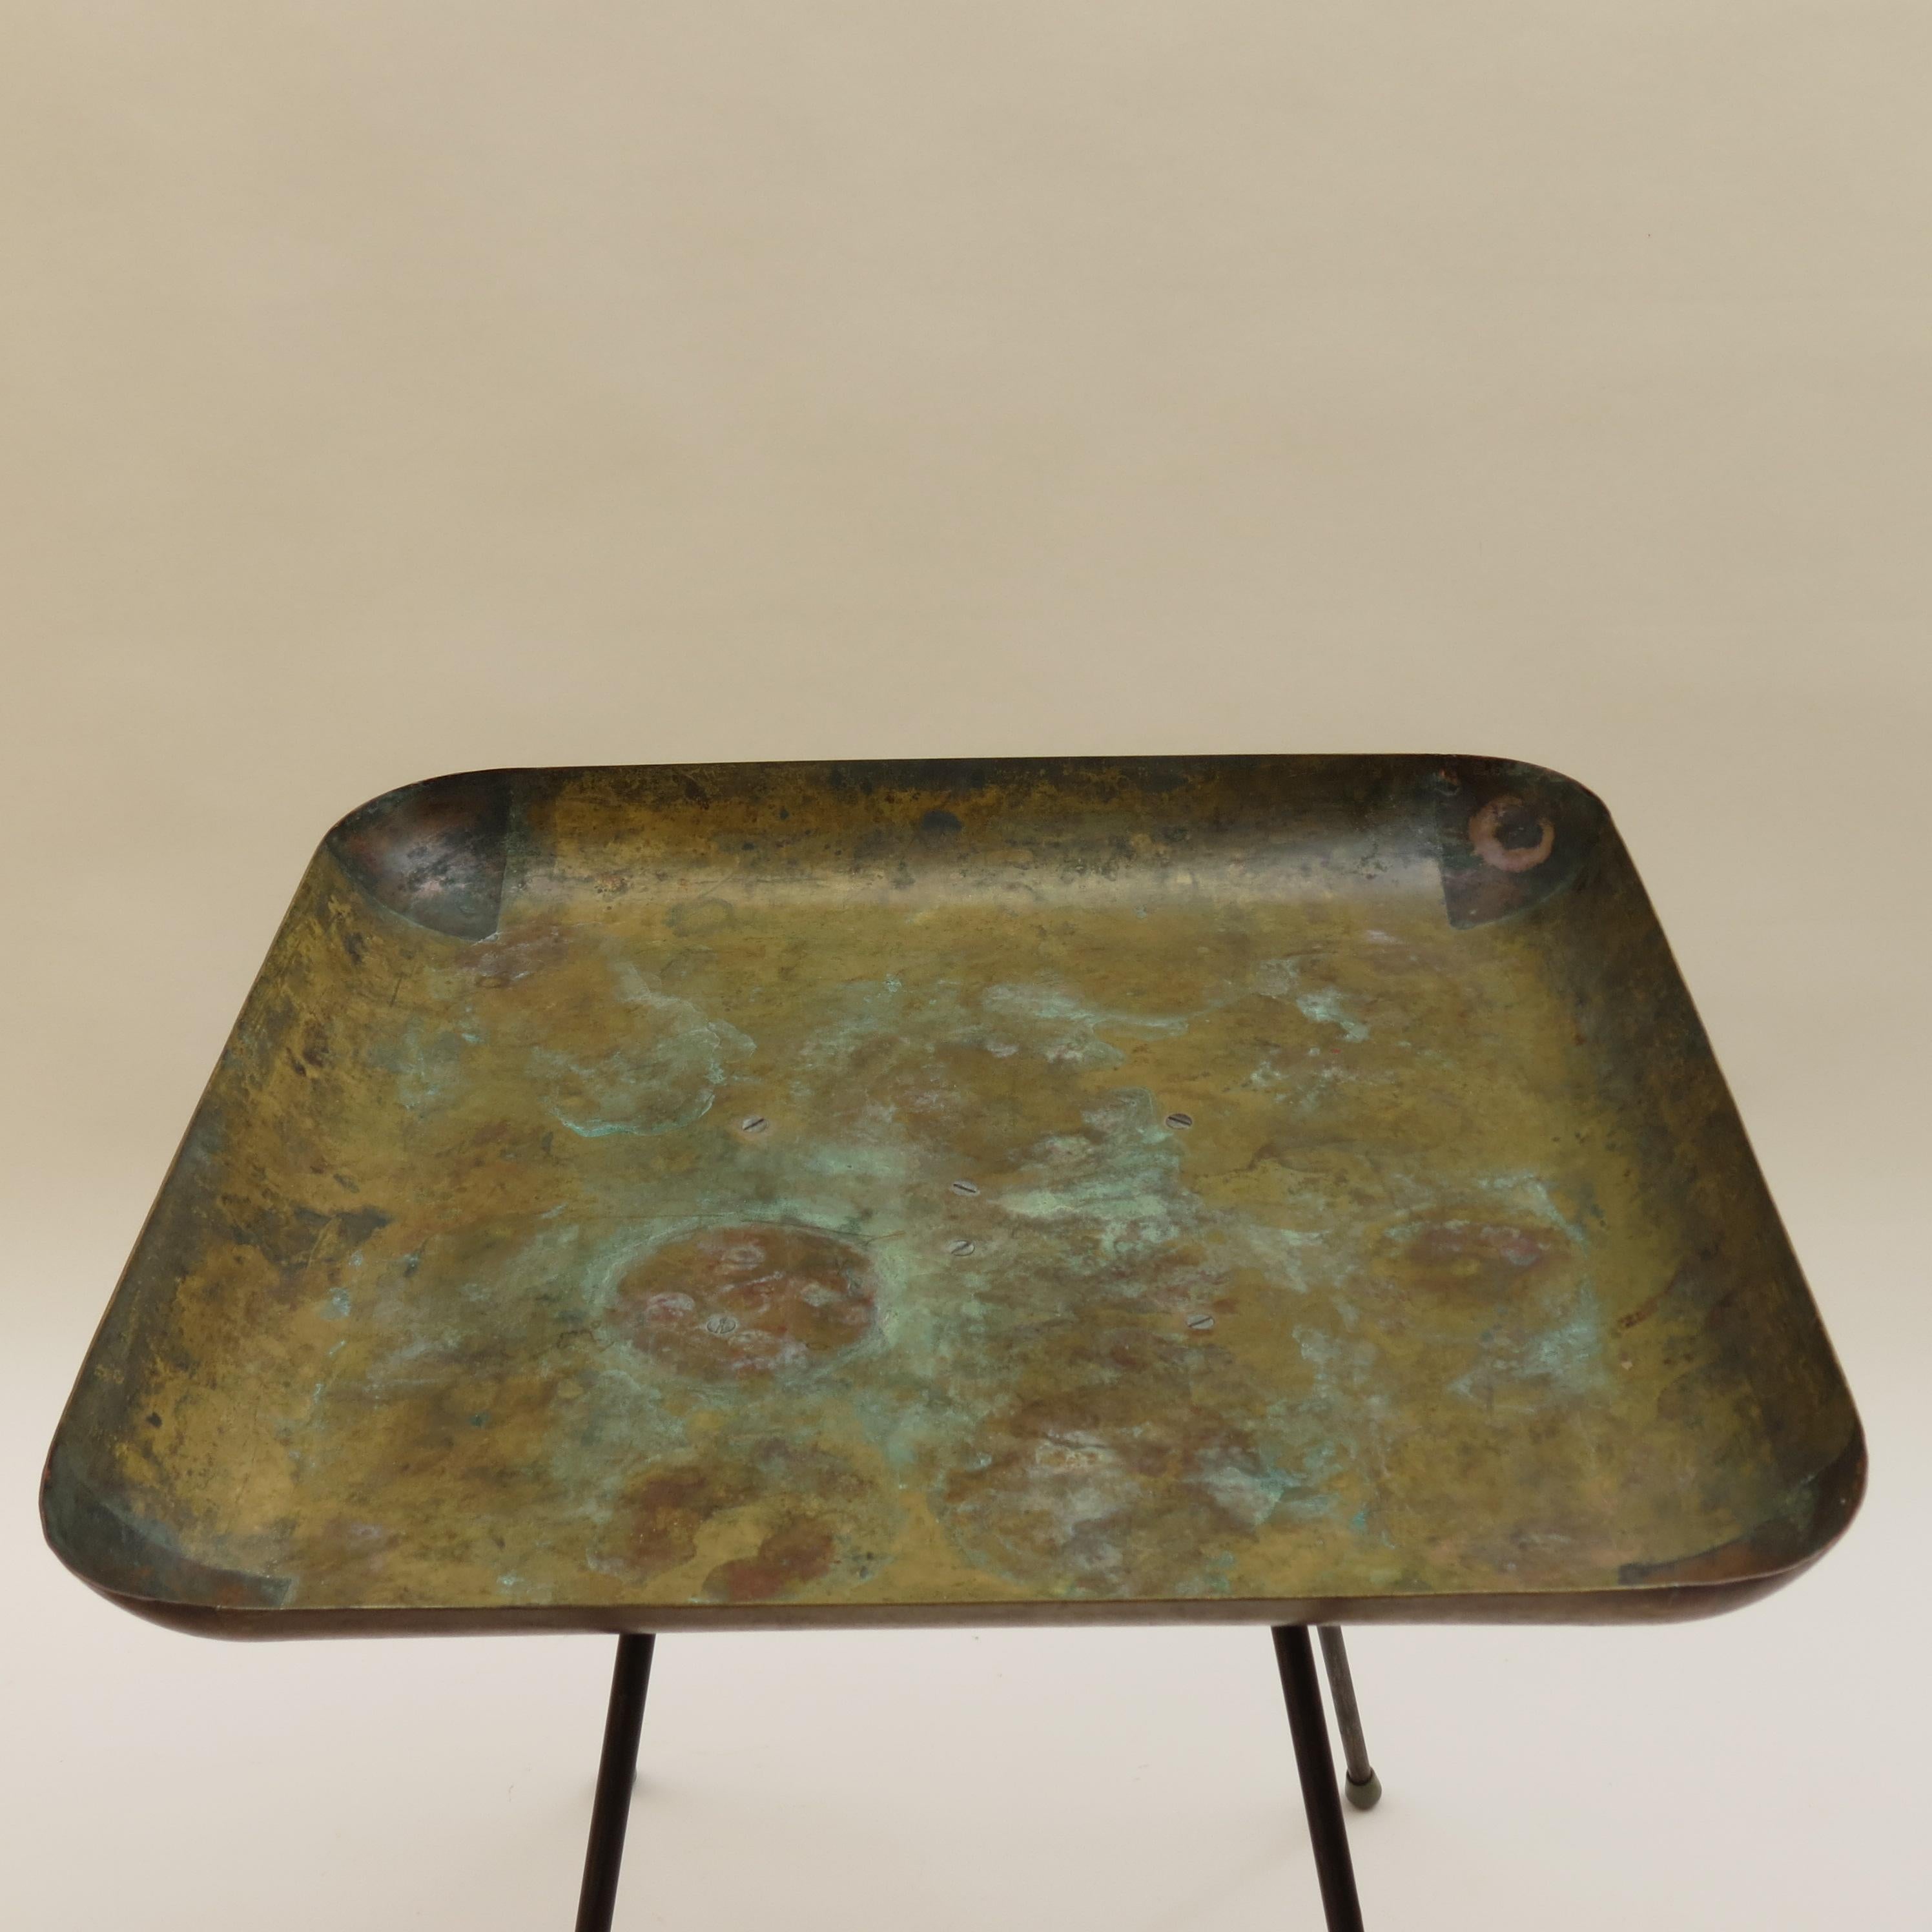 Wonderful handmade plant table or stand made from copper with steel legs. Very much in the Aubock style.  Great patination and age related distressing, with a wonderful rich copper colour.  This piece dates from the 1950s and has been handmade and